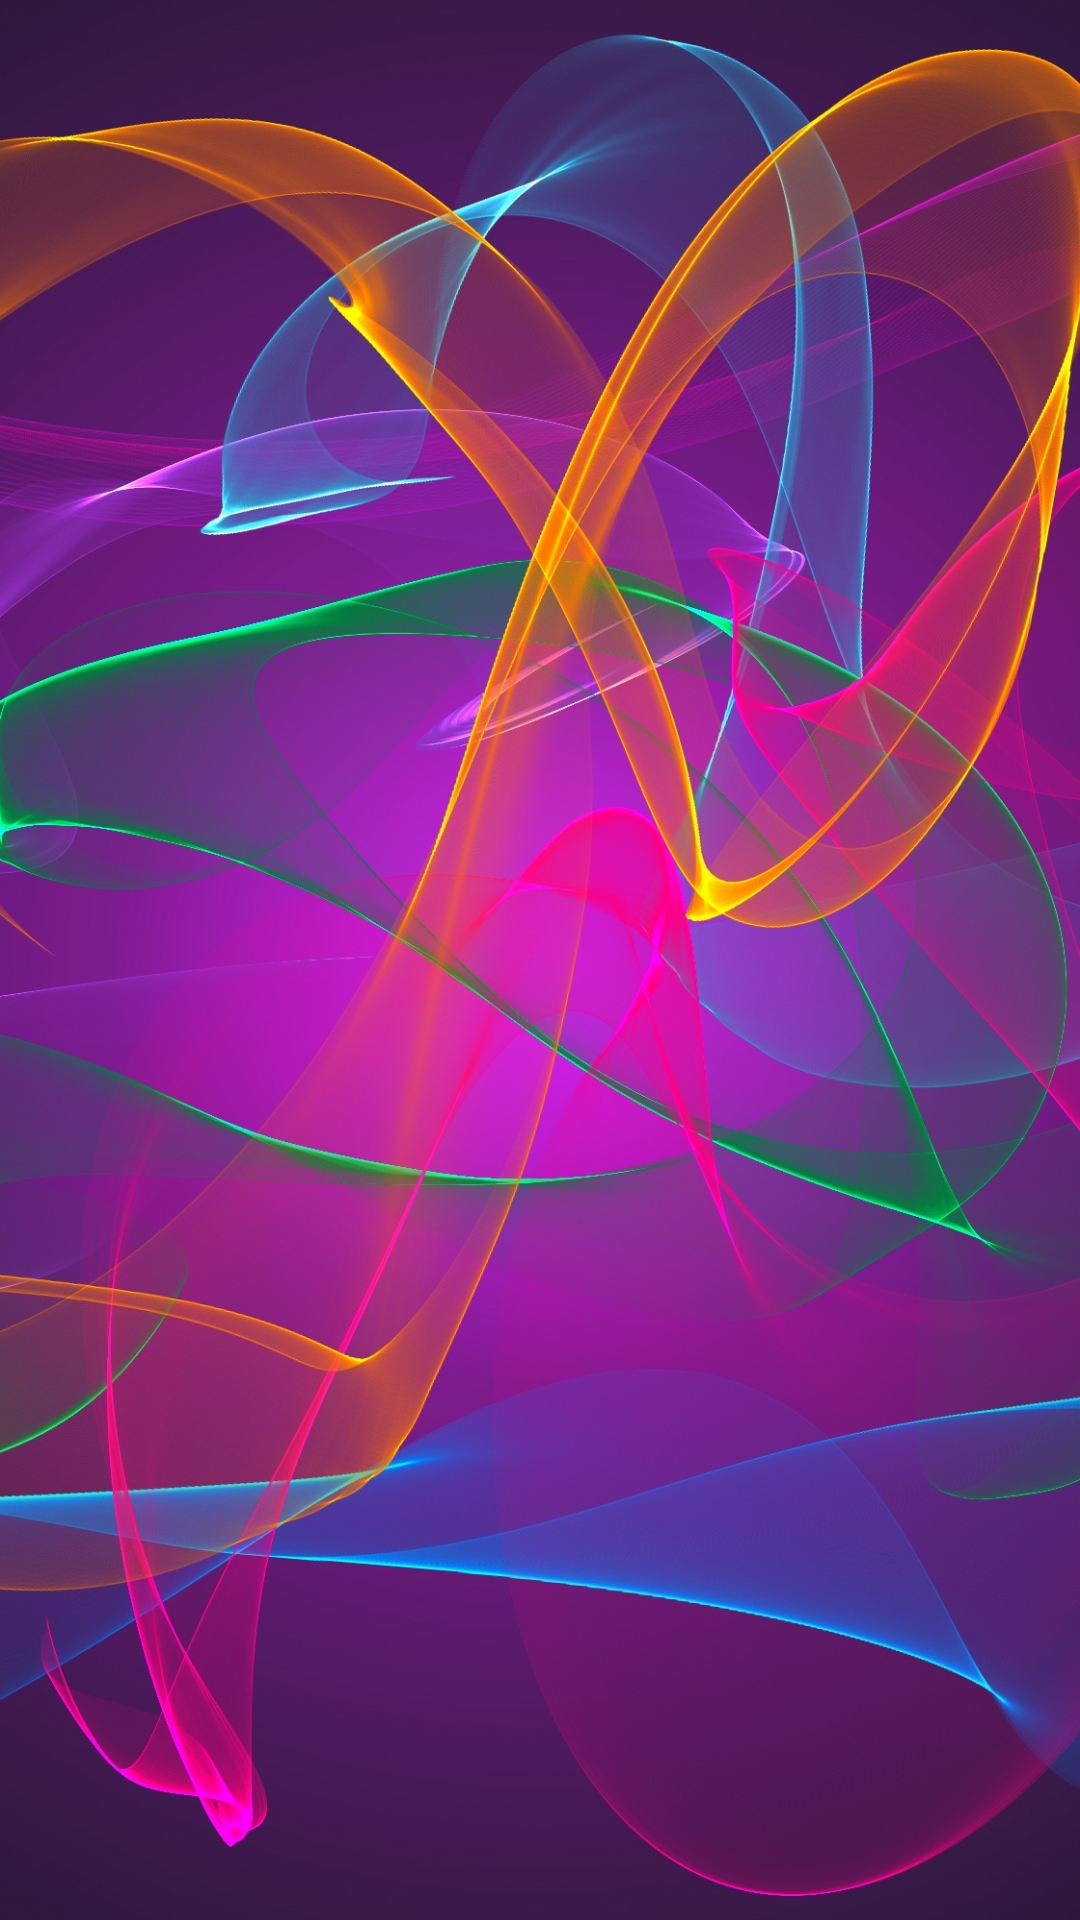 Abstractcolors 1080x1920 Wallpaper Id 216892 Mobile Abyss